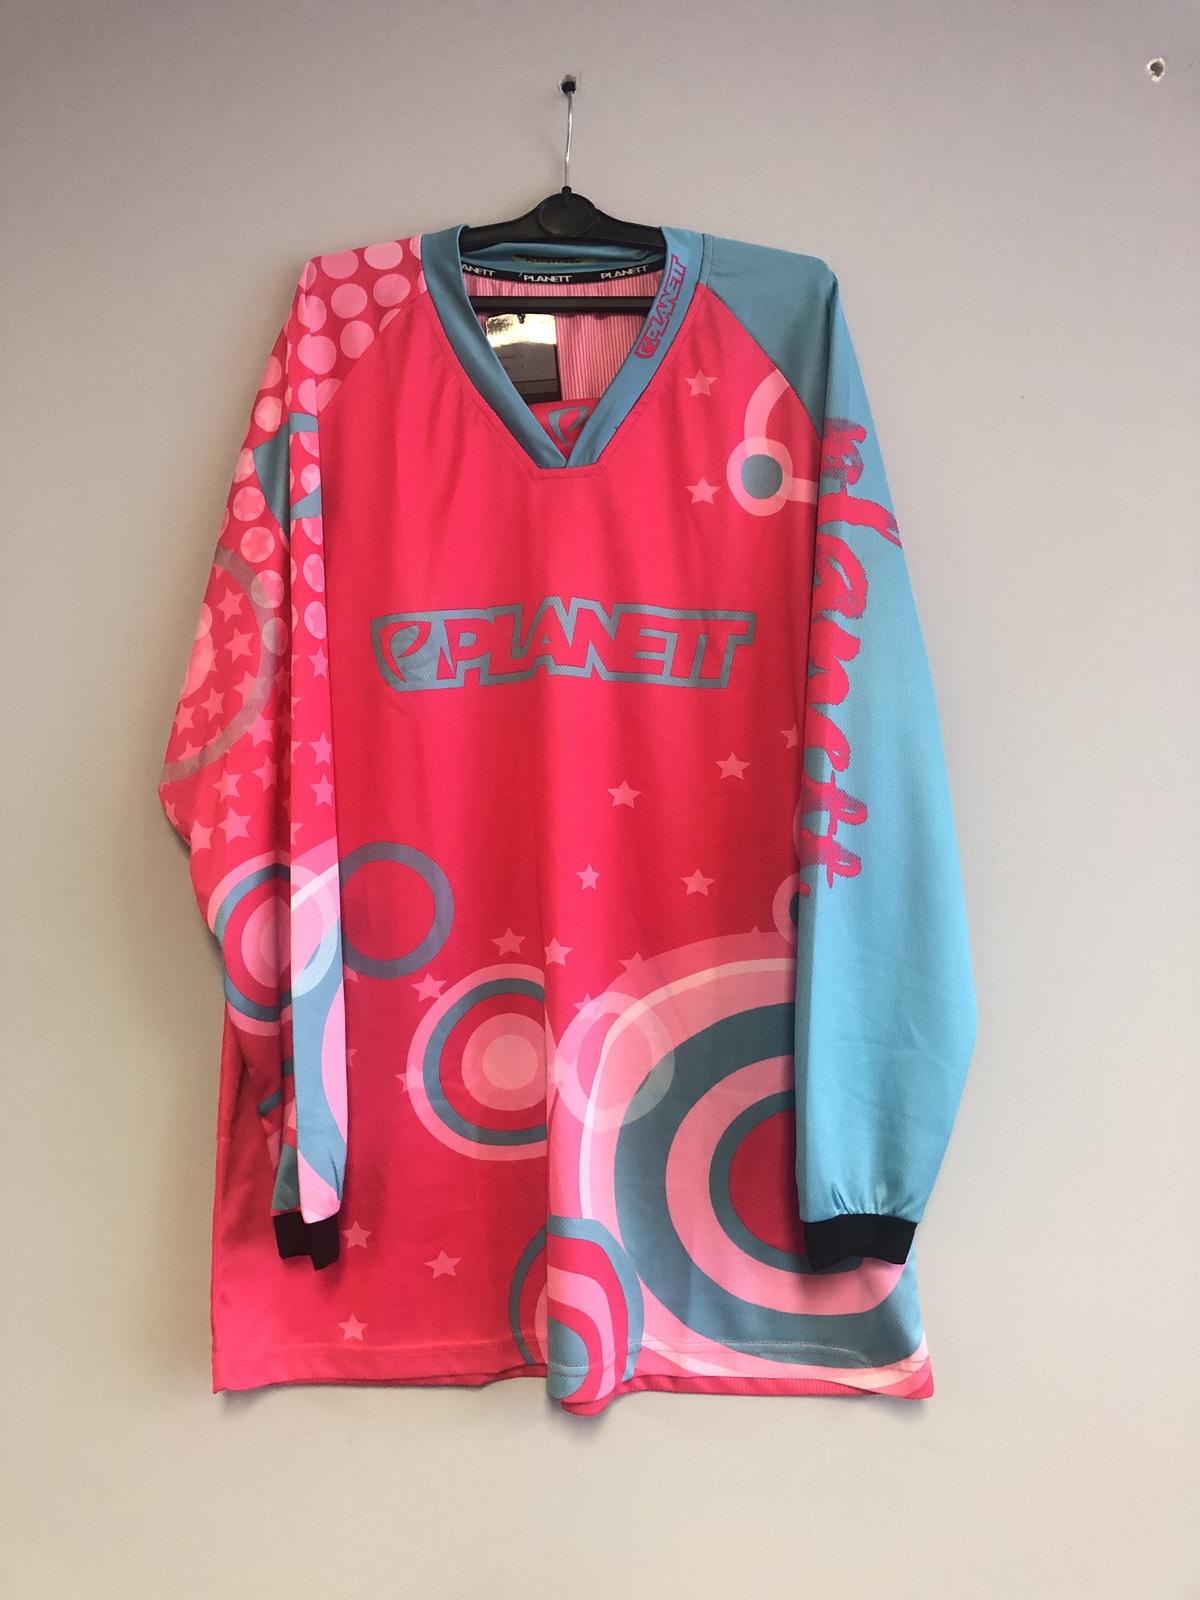 teal and pink jersey